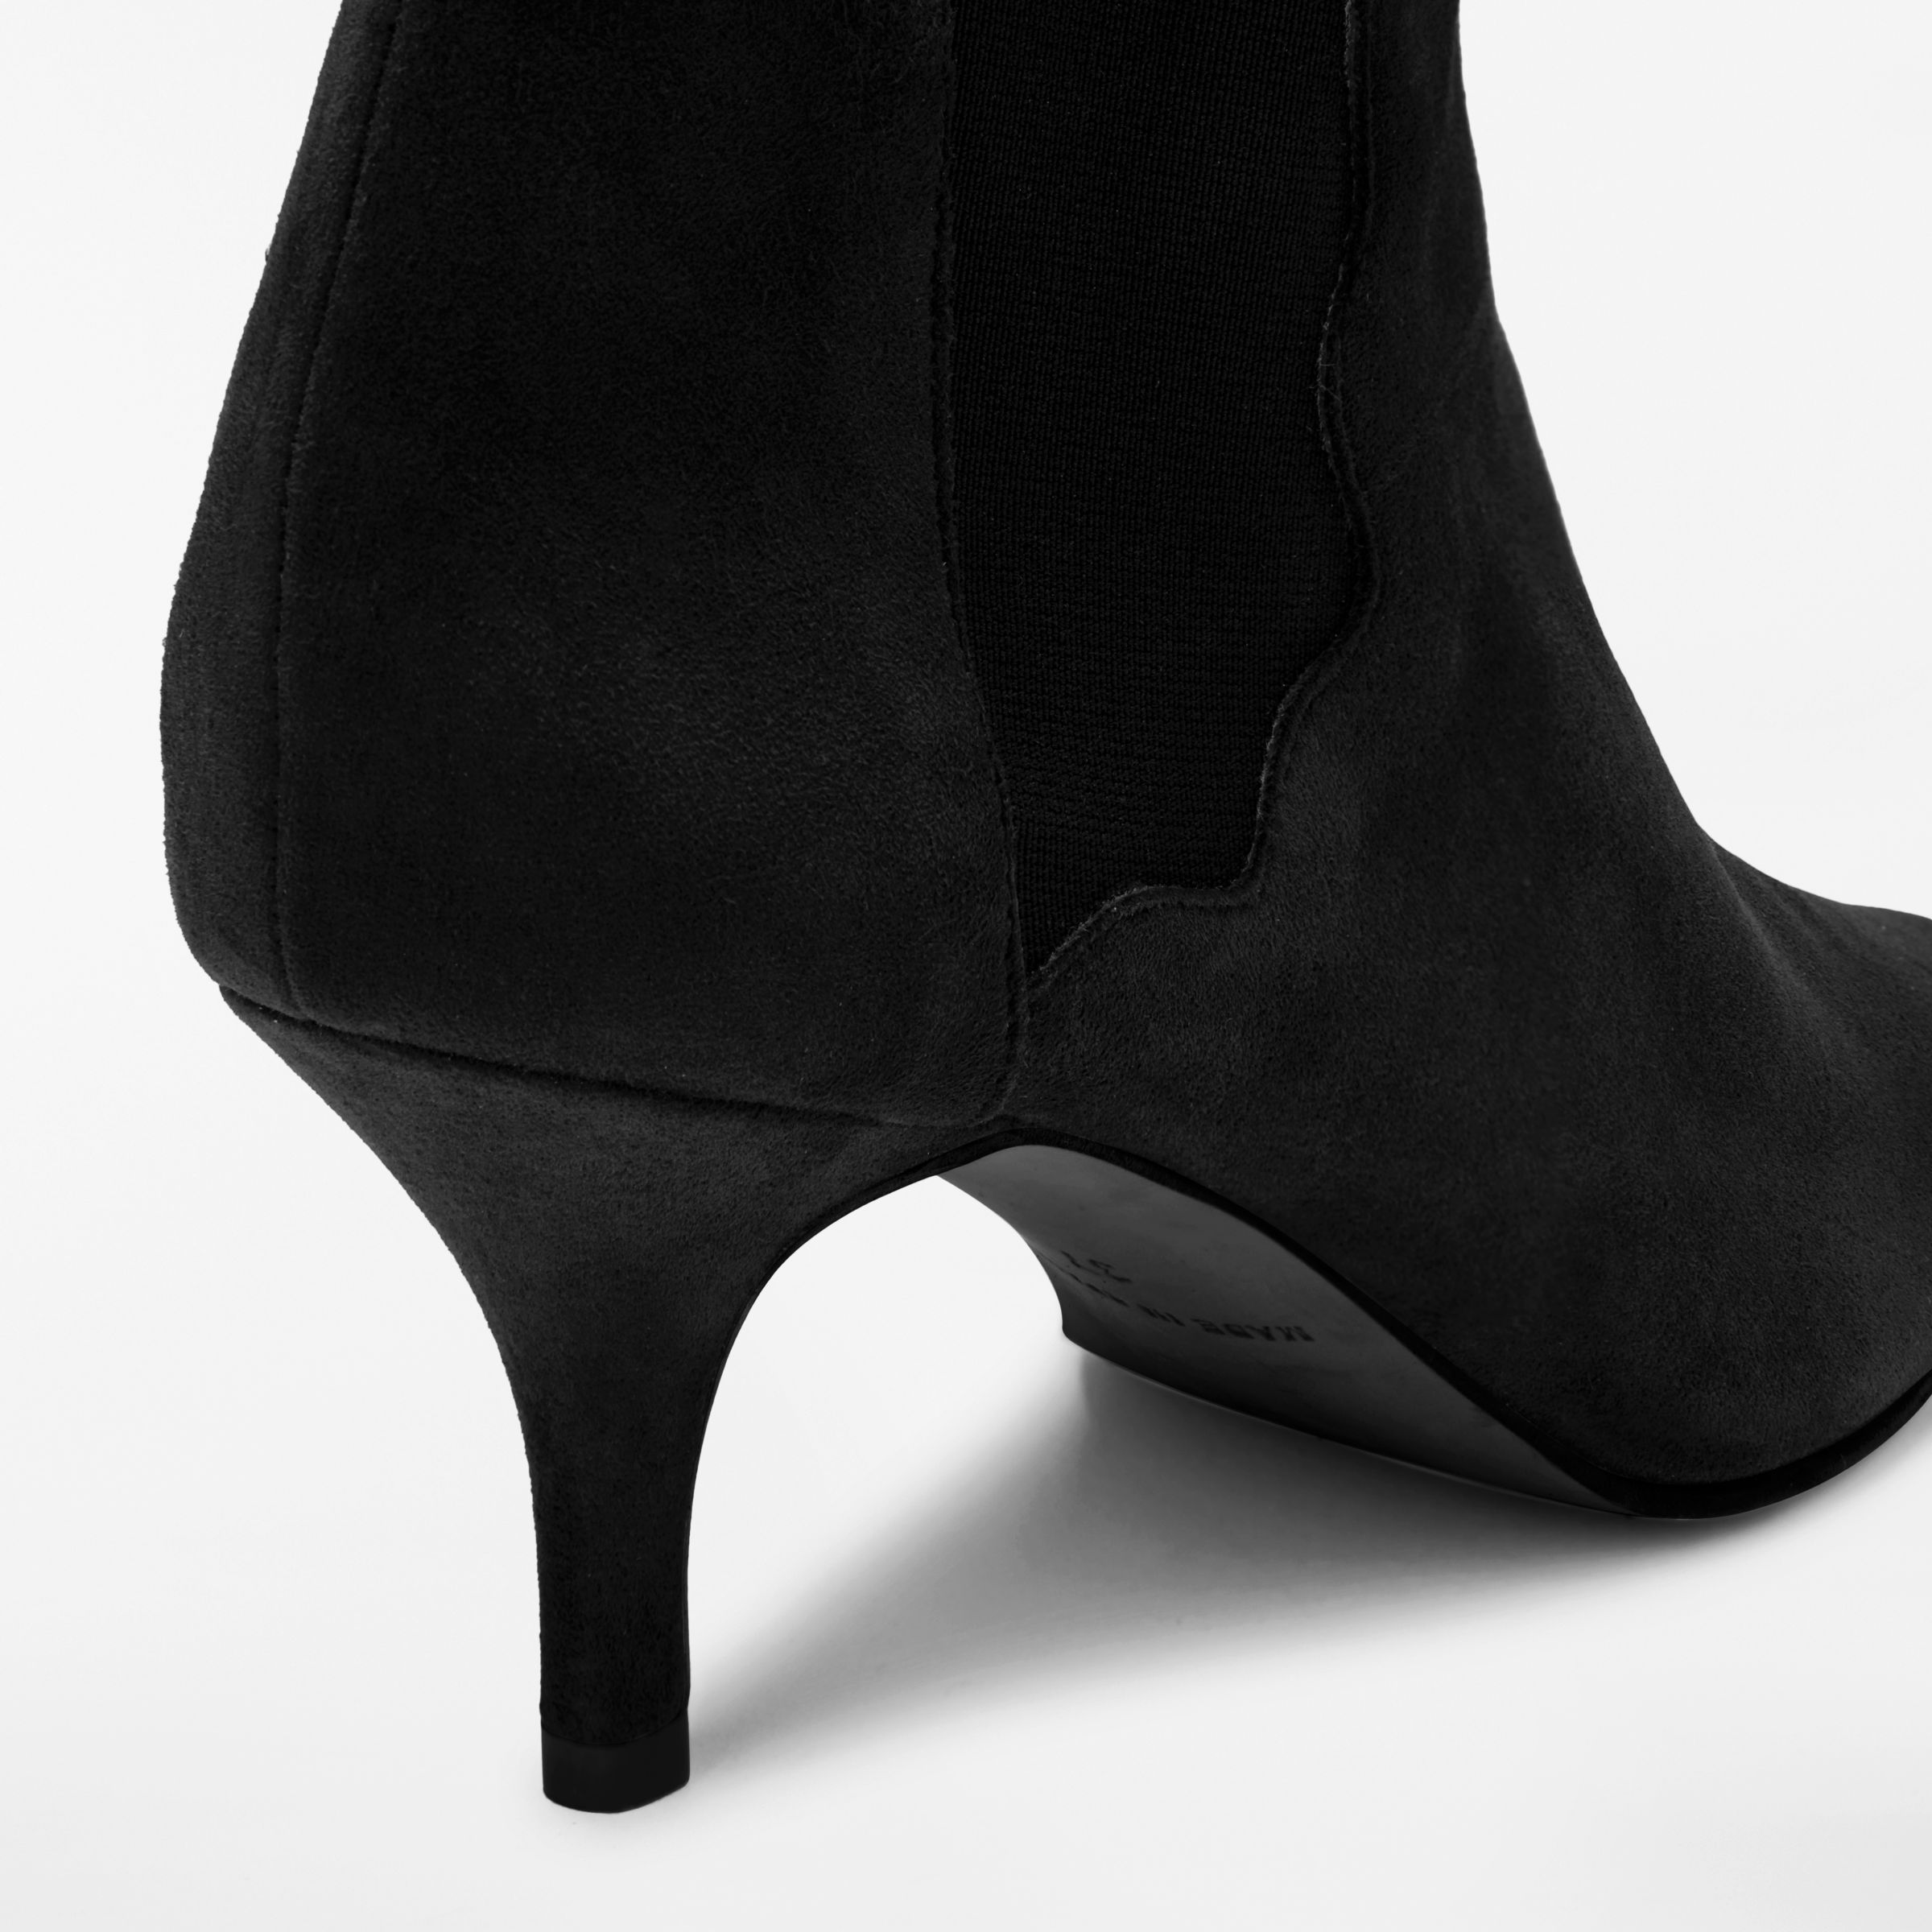 John Lewis & Partners Opal Ankle Boots, Black Suede at John Lewis ...